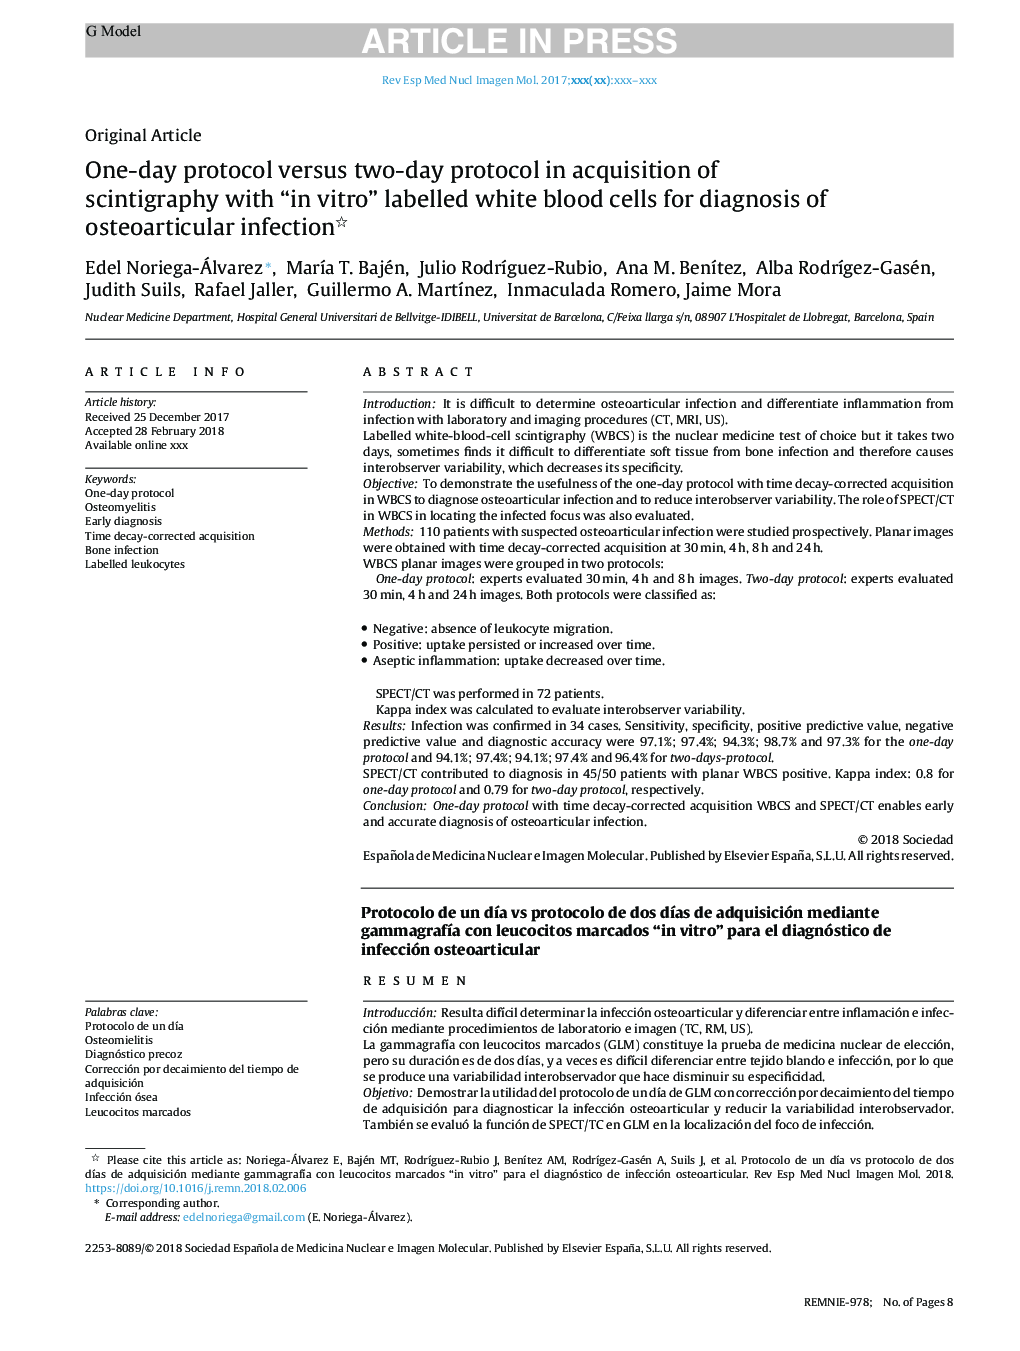 One-day protocol versus two-day protocol in acquisition of scintigraphy with “in vitro” labelled white blood cells for diagnosis of osteoarticular infection